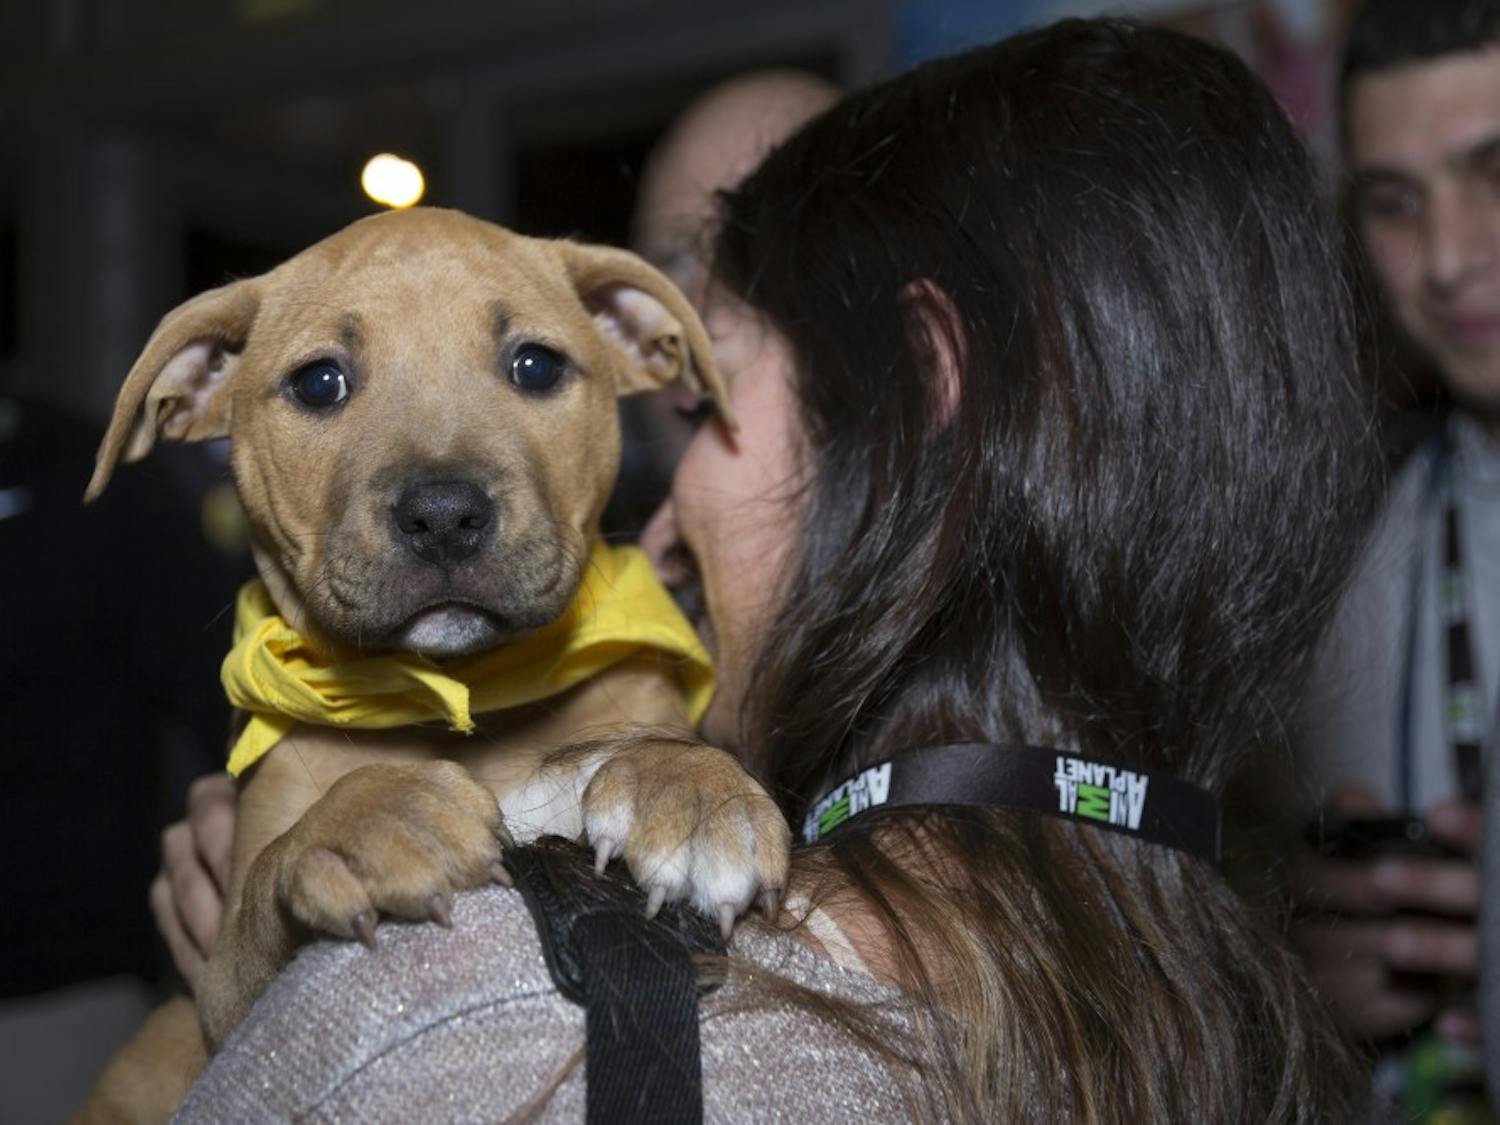 Angela Tegnelia holds Bonnie at the Puppy Bowl at the Super Bowl Central in downtown Phoenix on Jan. 29, 2015. Every puppy at the event was available for adoption. (Emily Johnson/ The State Press)